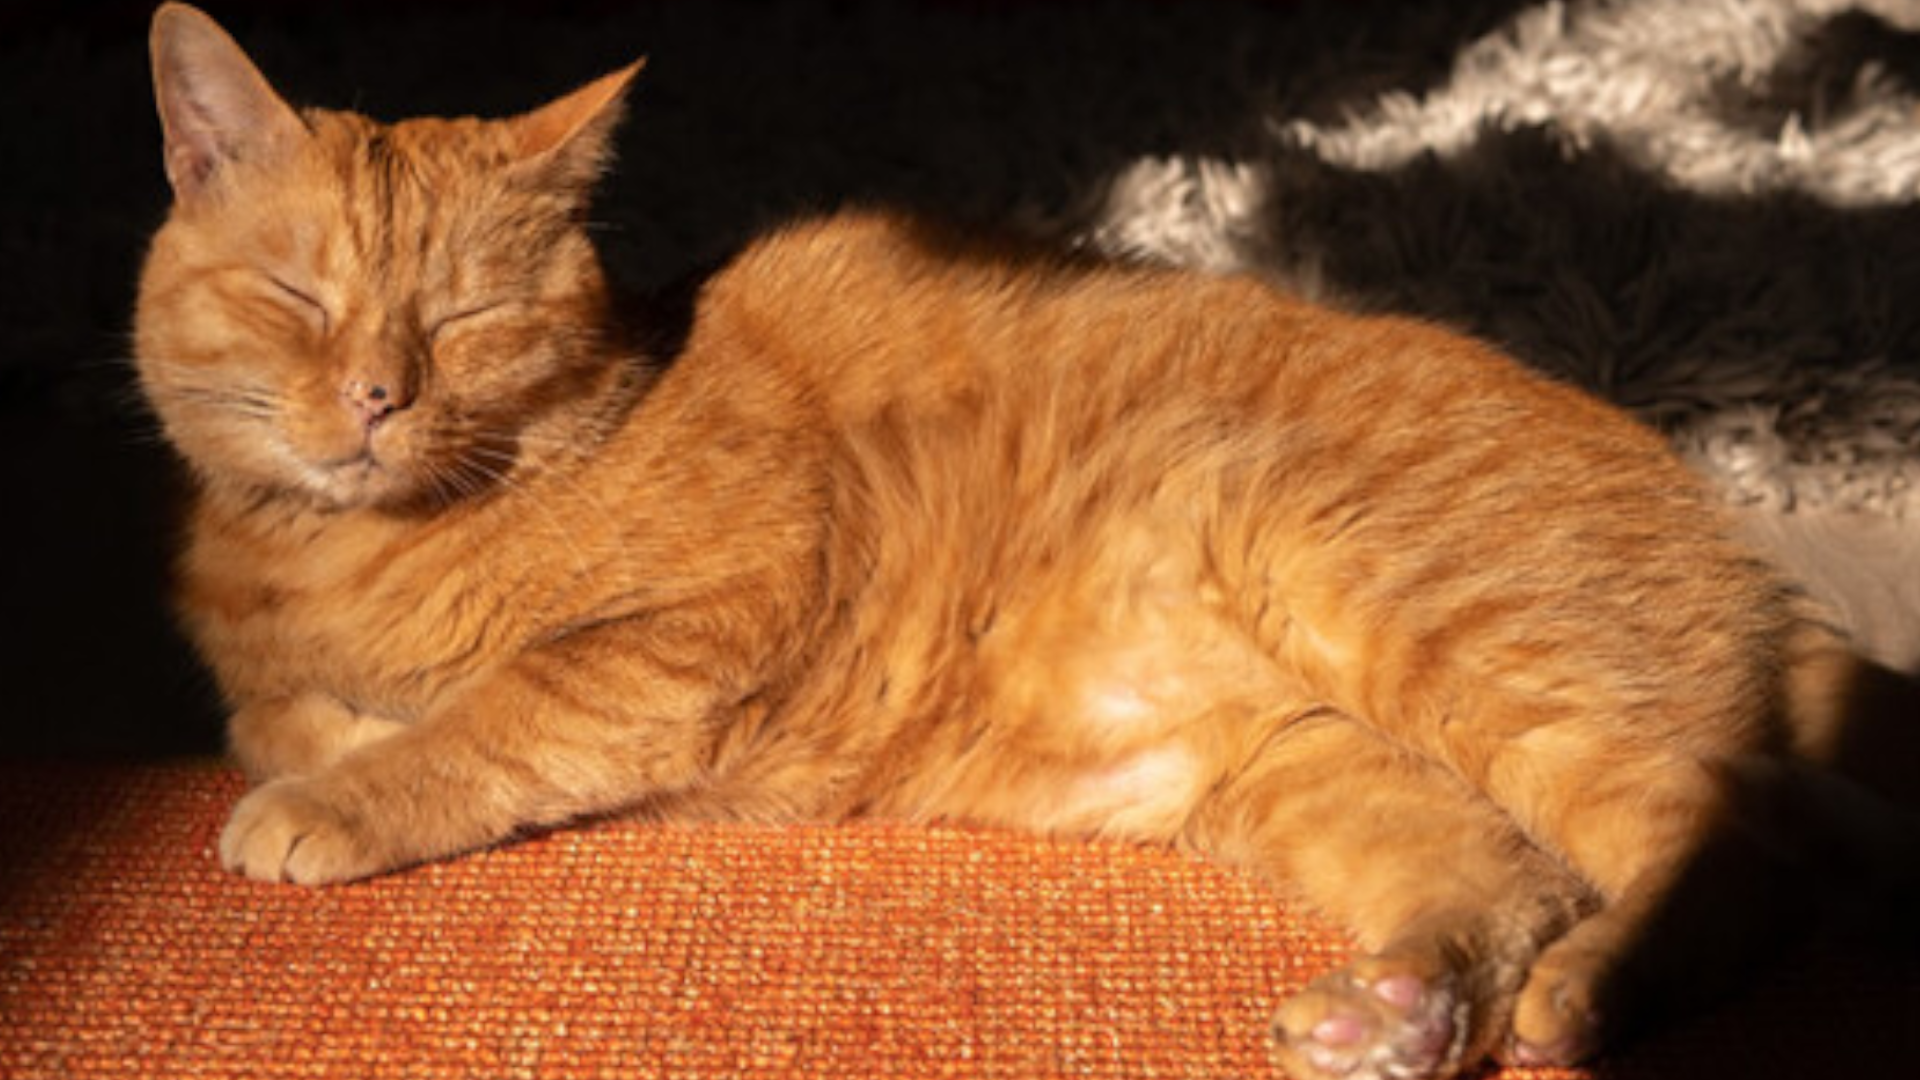 Orange tabby Murtaugh, on whom Stray's cat is partially based, napping in the sun